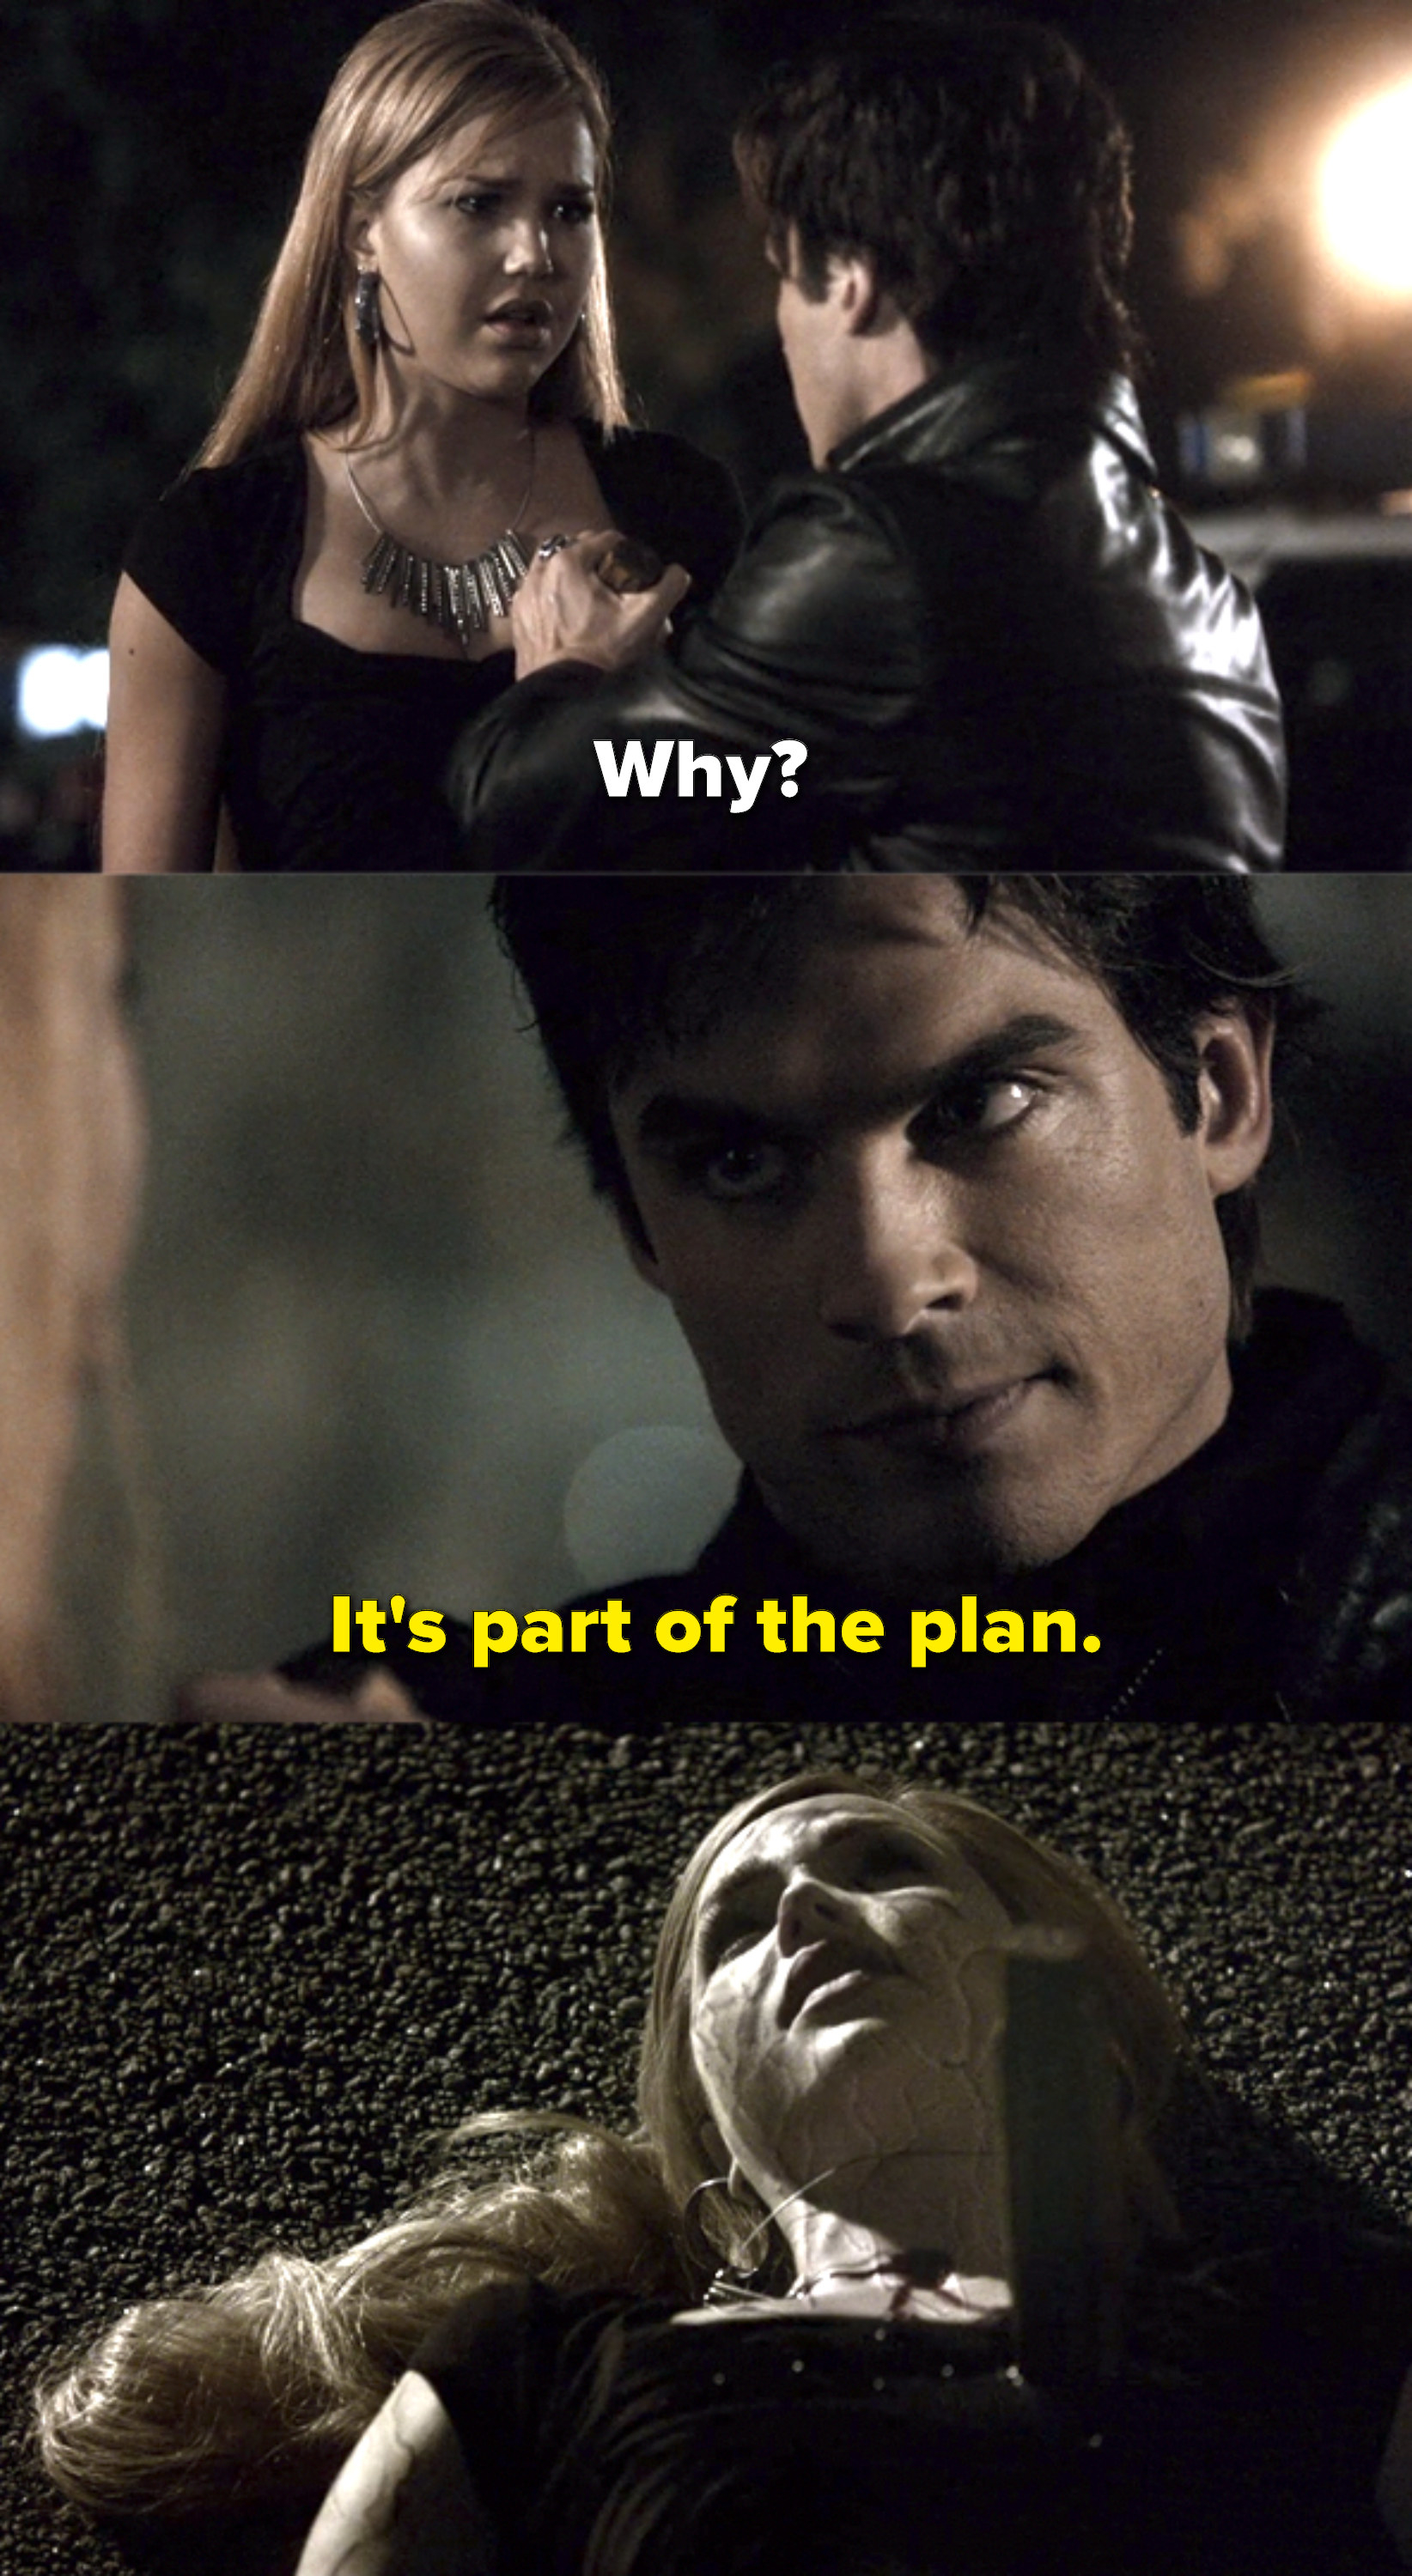 Damon stakes Lexi, who asks why. He says it&#x27;s part of the plan, and she dies